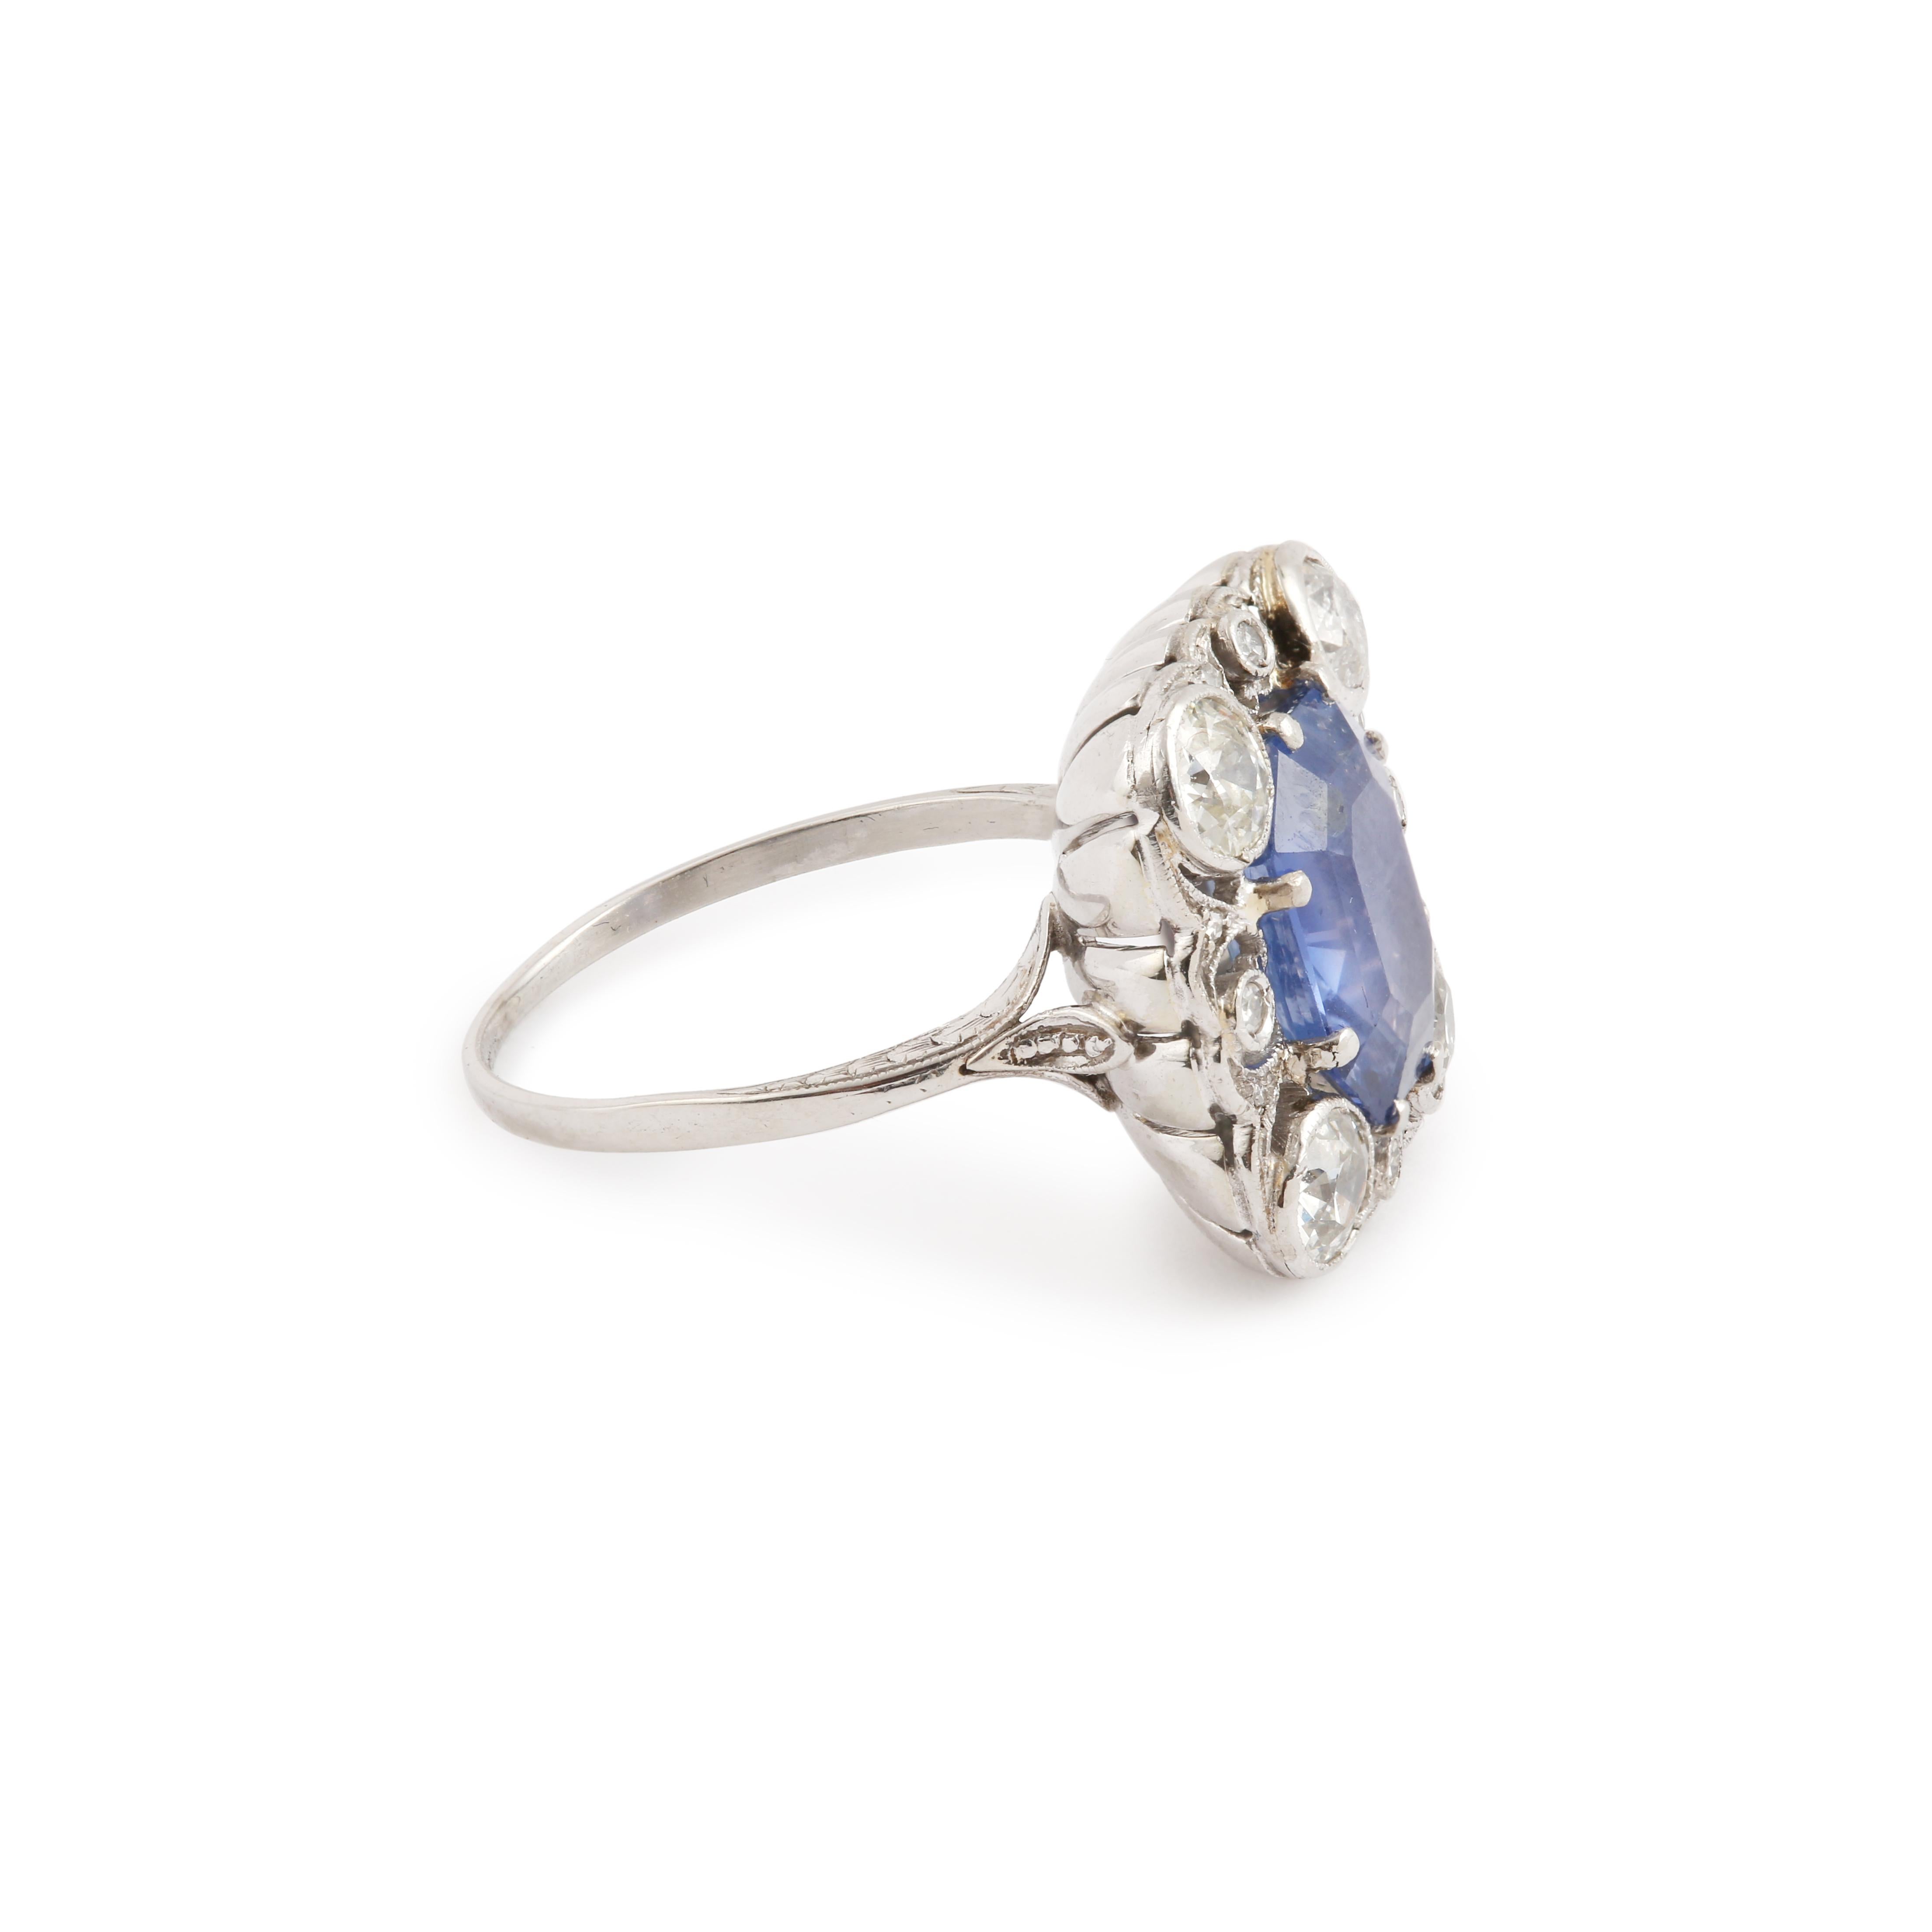 Important platinum ring centred by a cushion-cut unheated sapphire surrounded by old-cut diamonds.

Weight of the sapphire: 4.66 carats (sapphire unset)

With World Gemological Institute certificate, specifying natural sapphire, no indication of